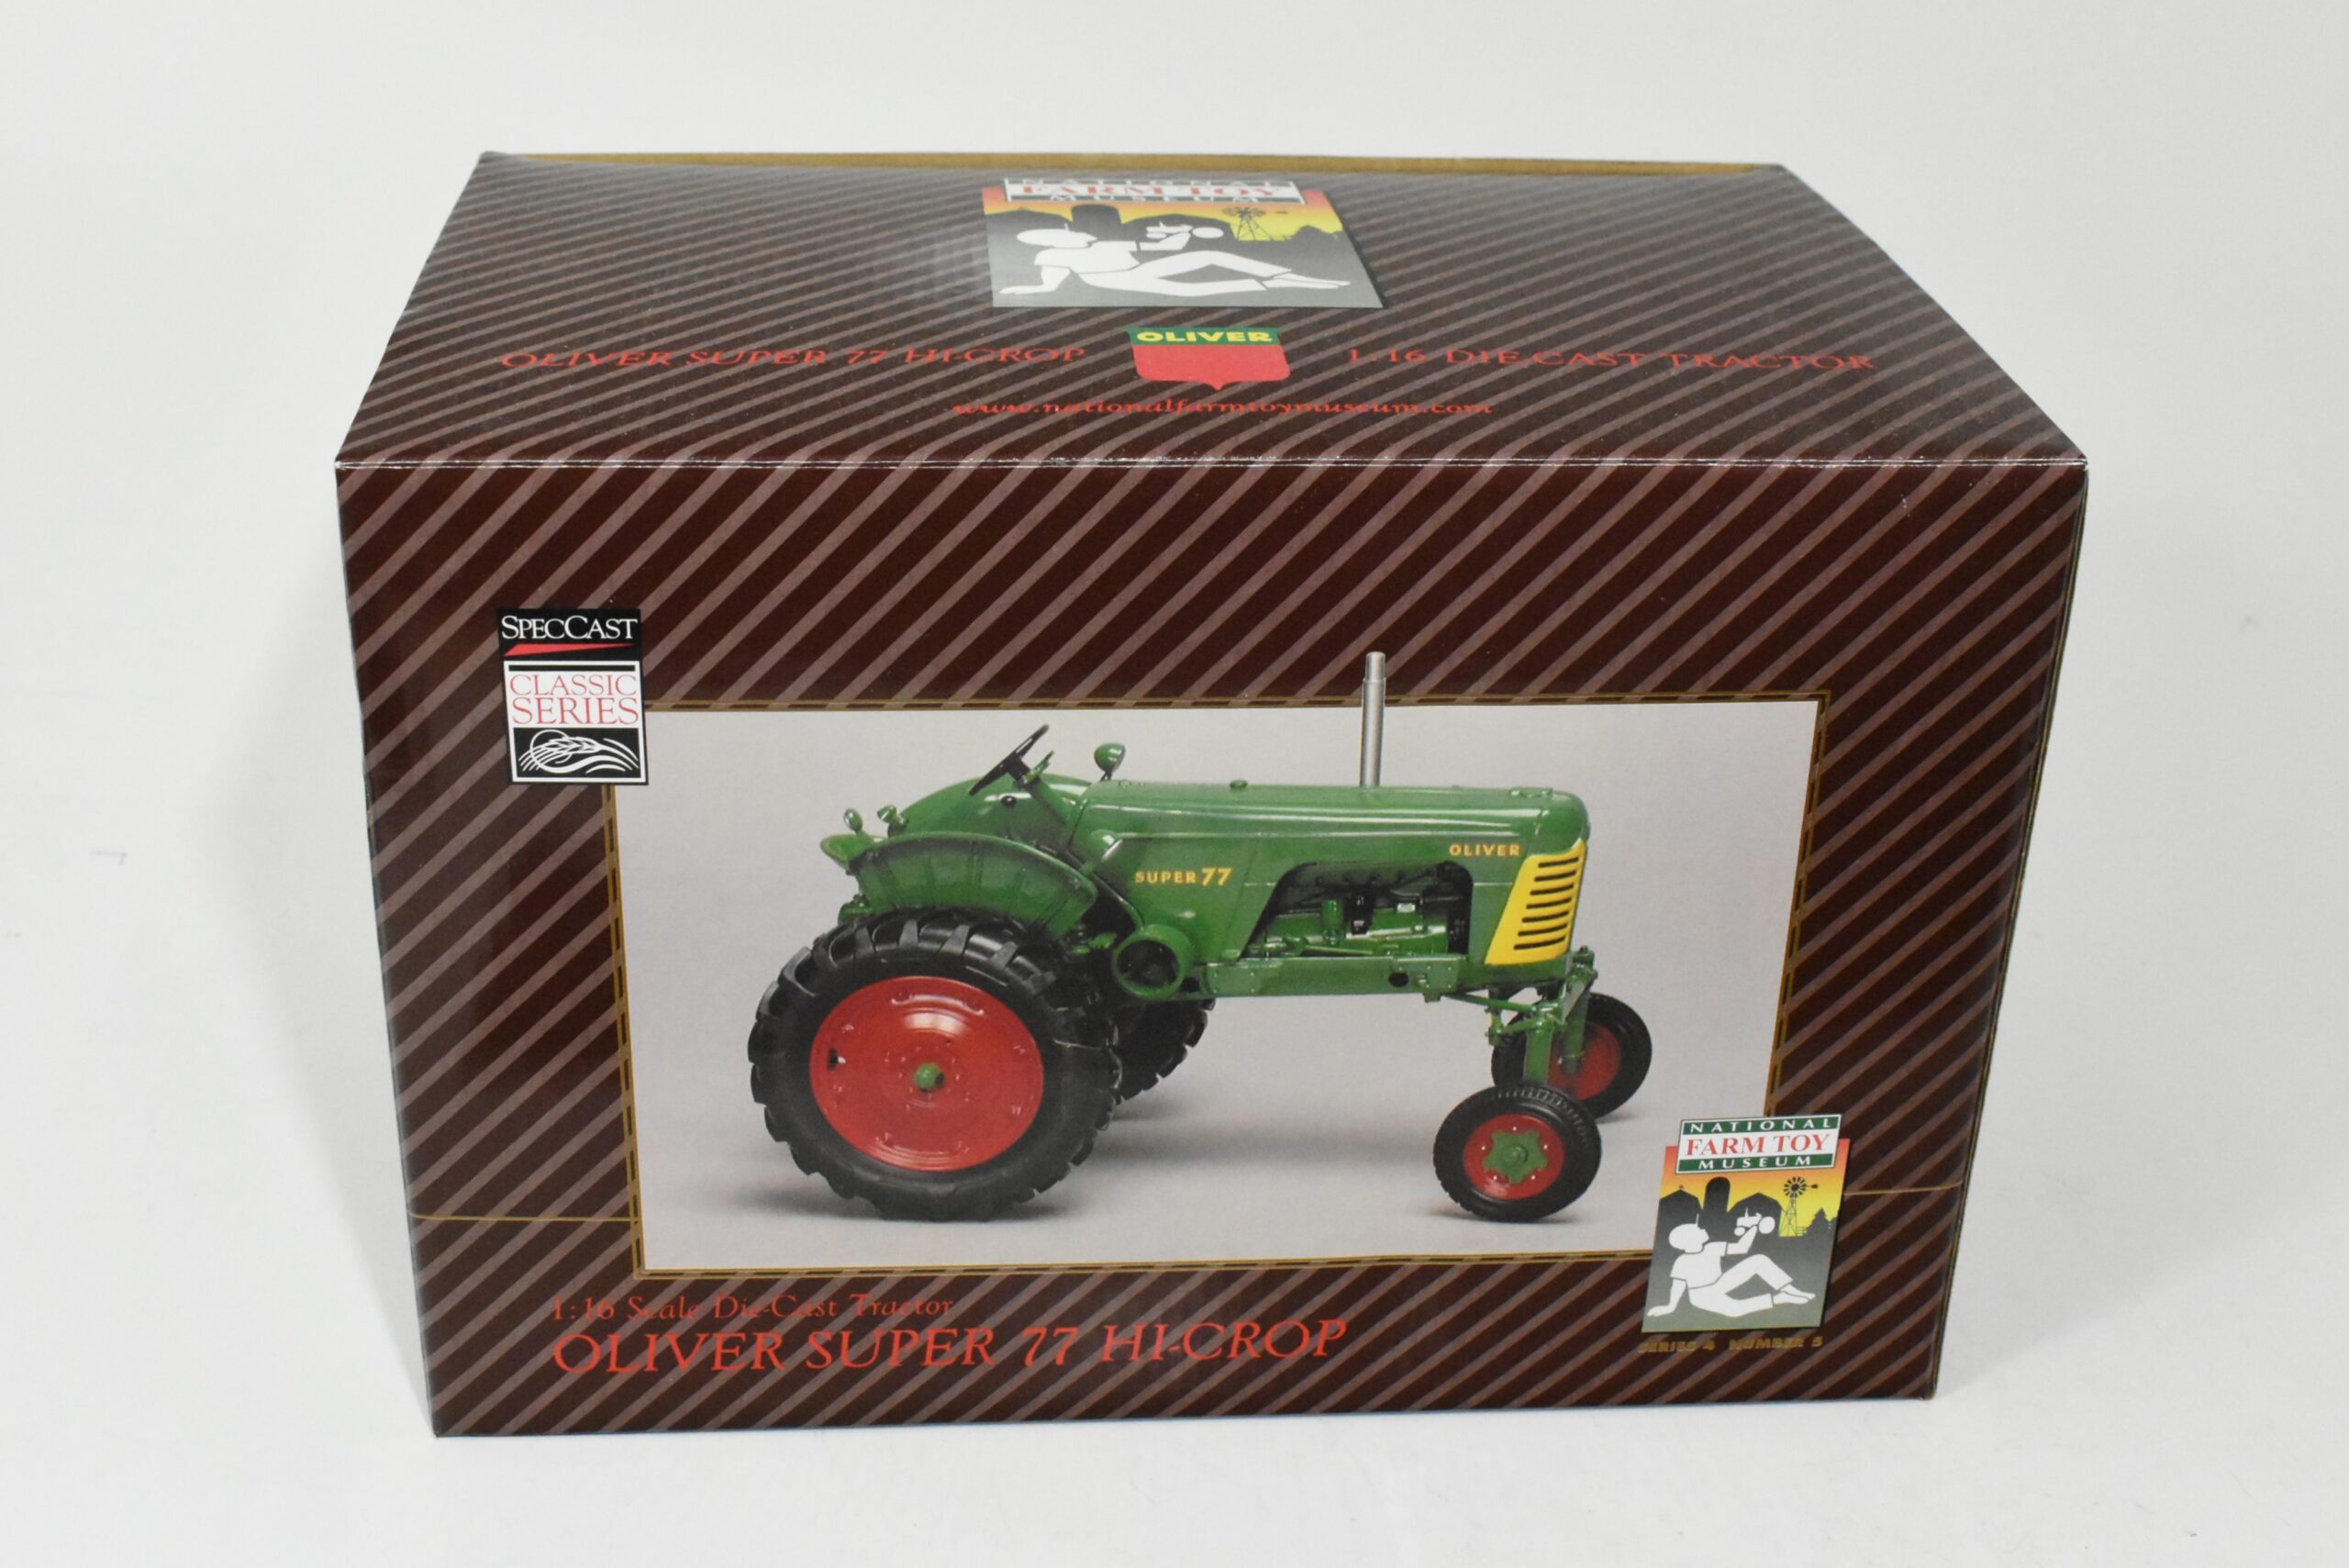 Natioal farmtoy musem oliver super hicrop 1/16scale  tractor 